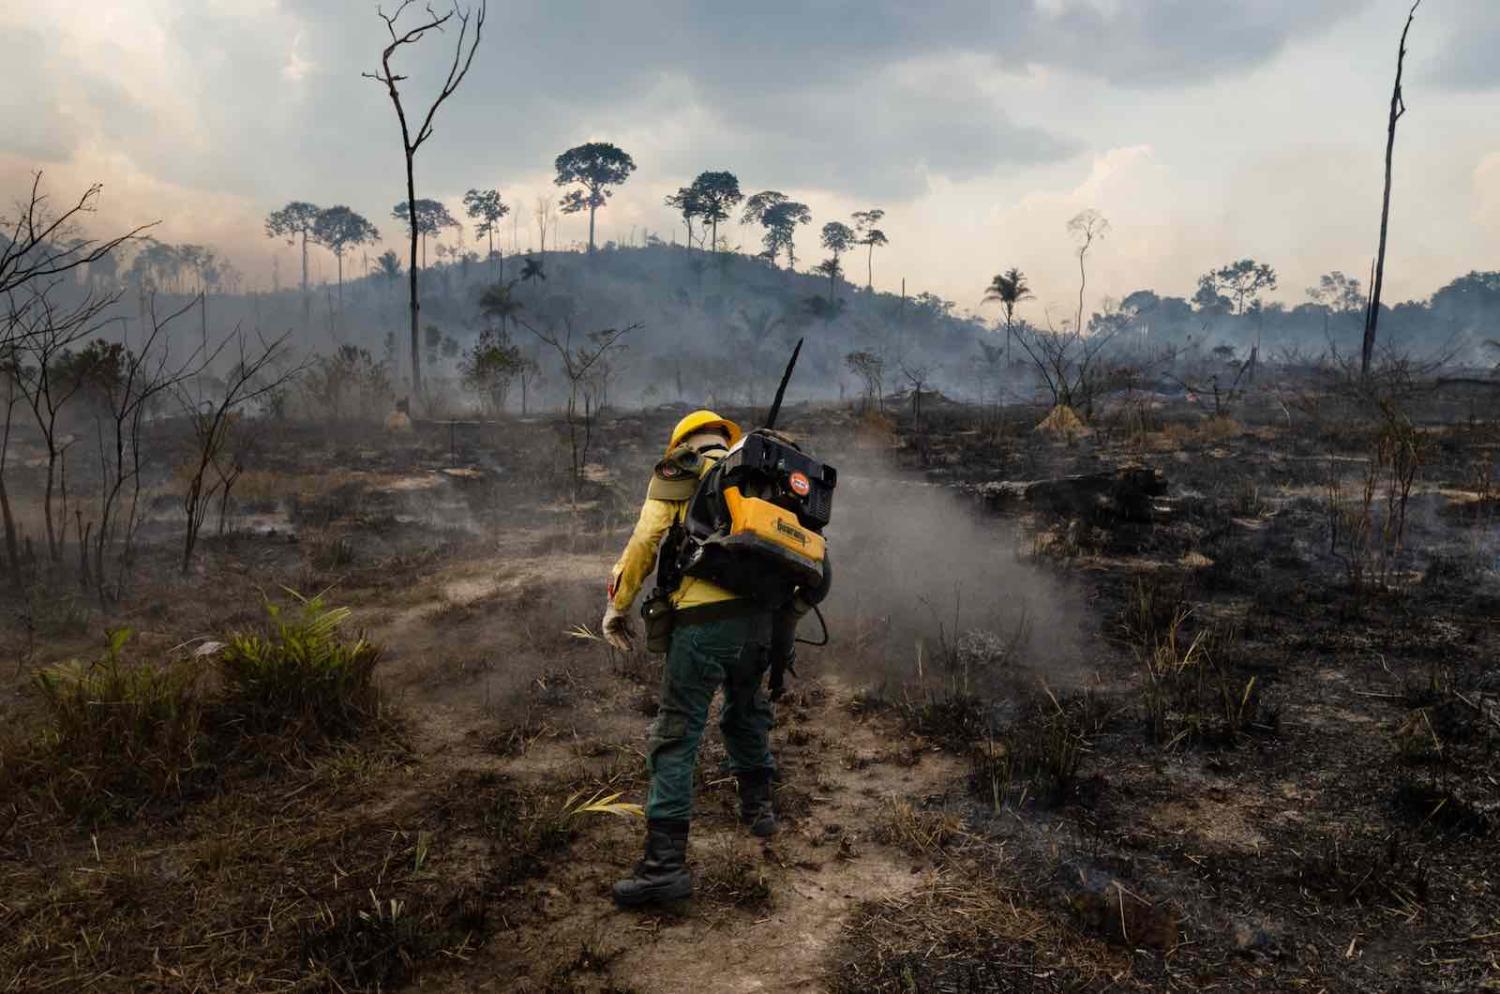 A member of the forest fire brigade fights burning in the Amazon, in Para state, northern Brazil,  September 2019 (Gustavo Basso/NurPhoto via Getty Images)